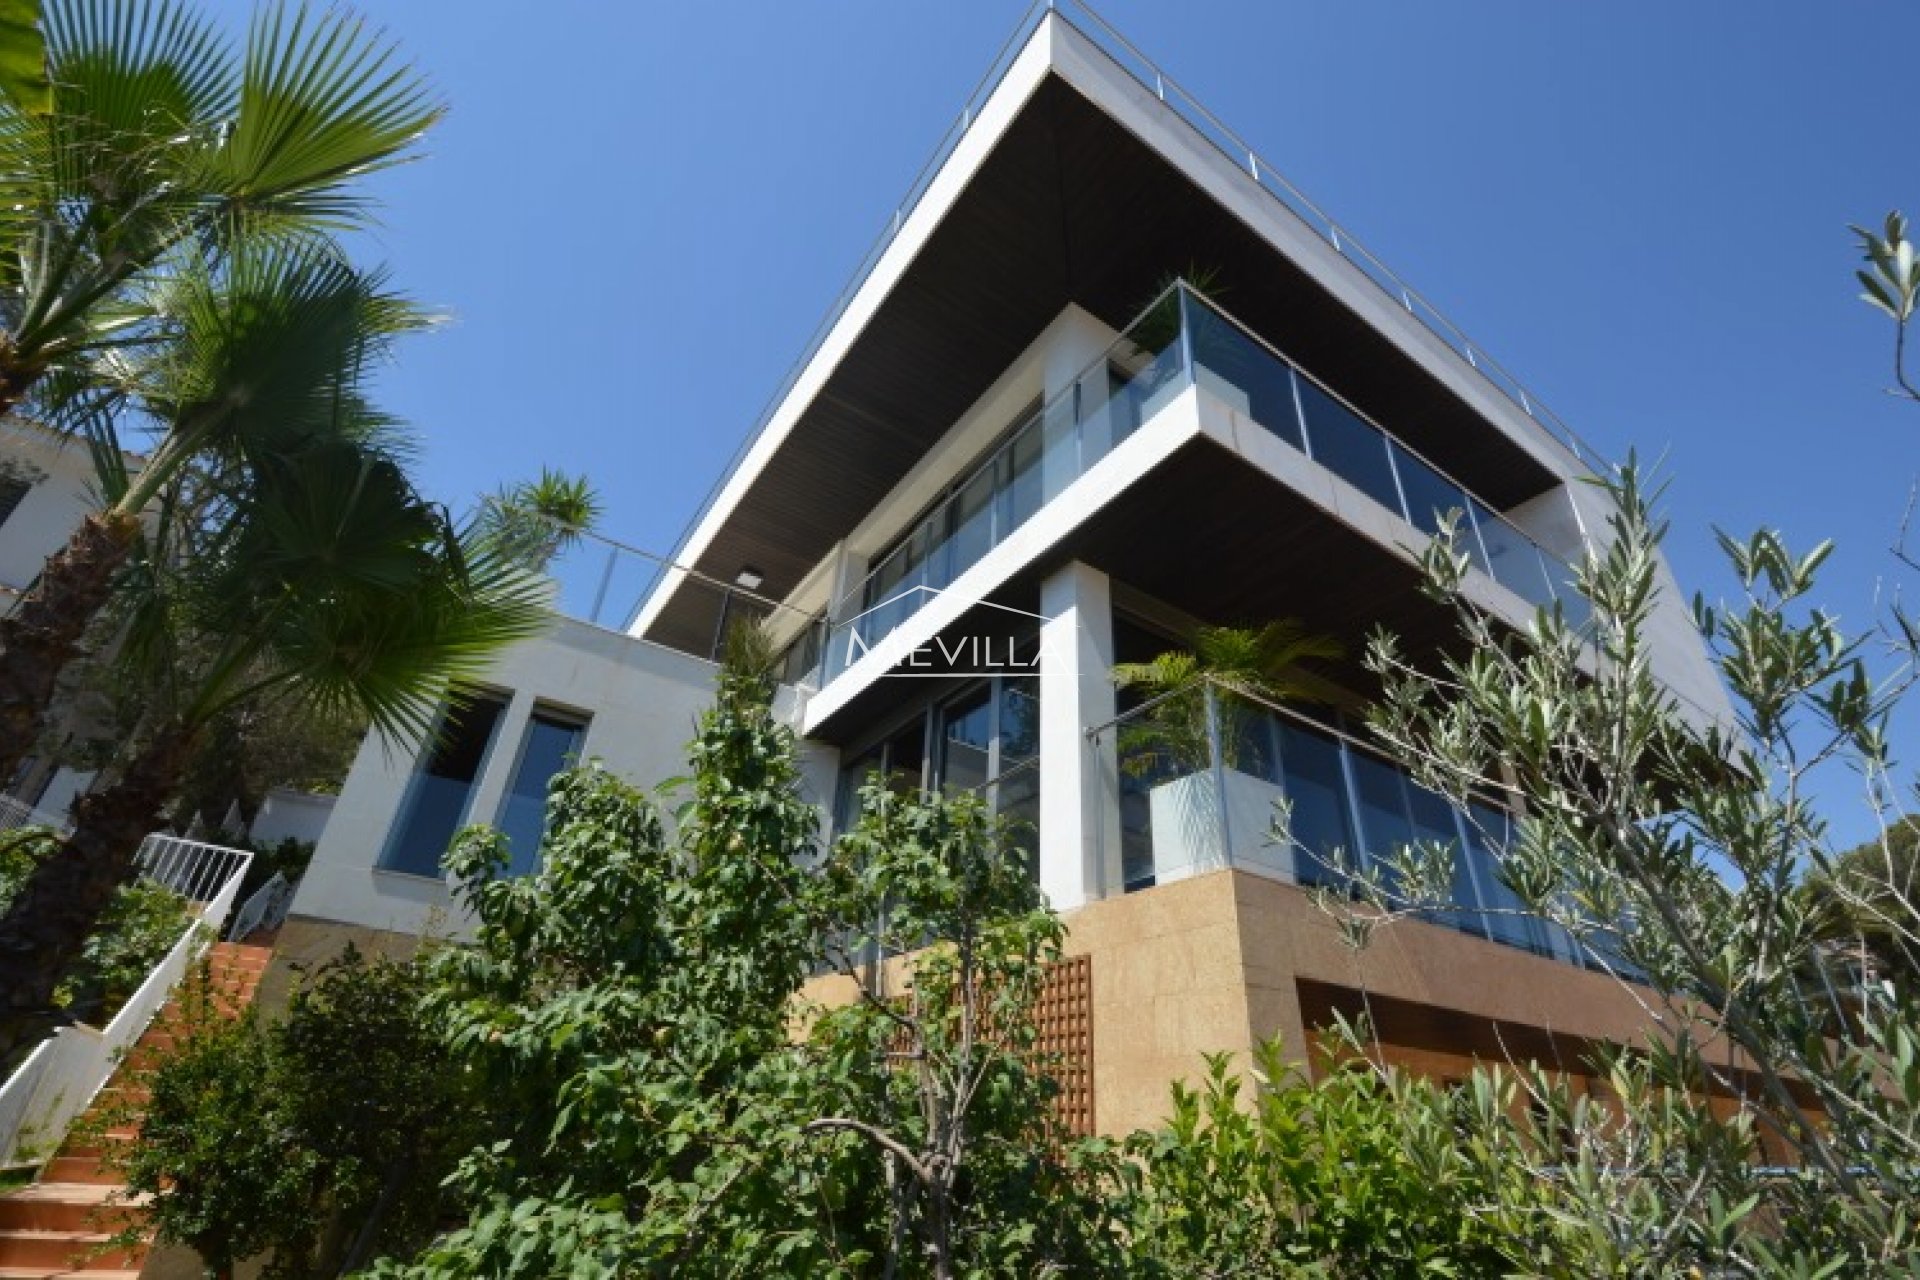 Luxury villa with modern design in Campoamor, for sale